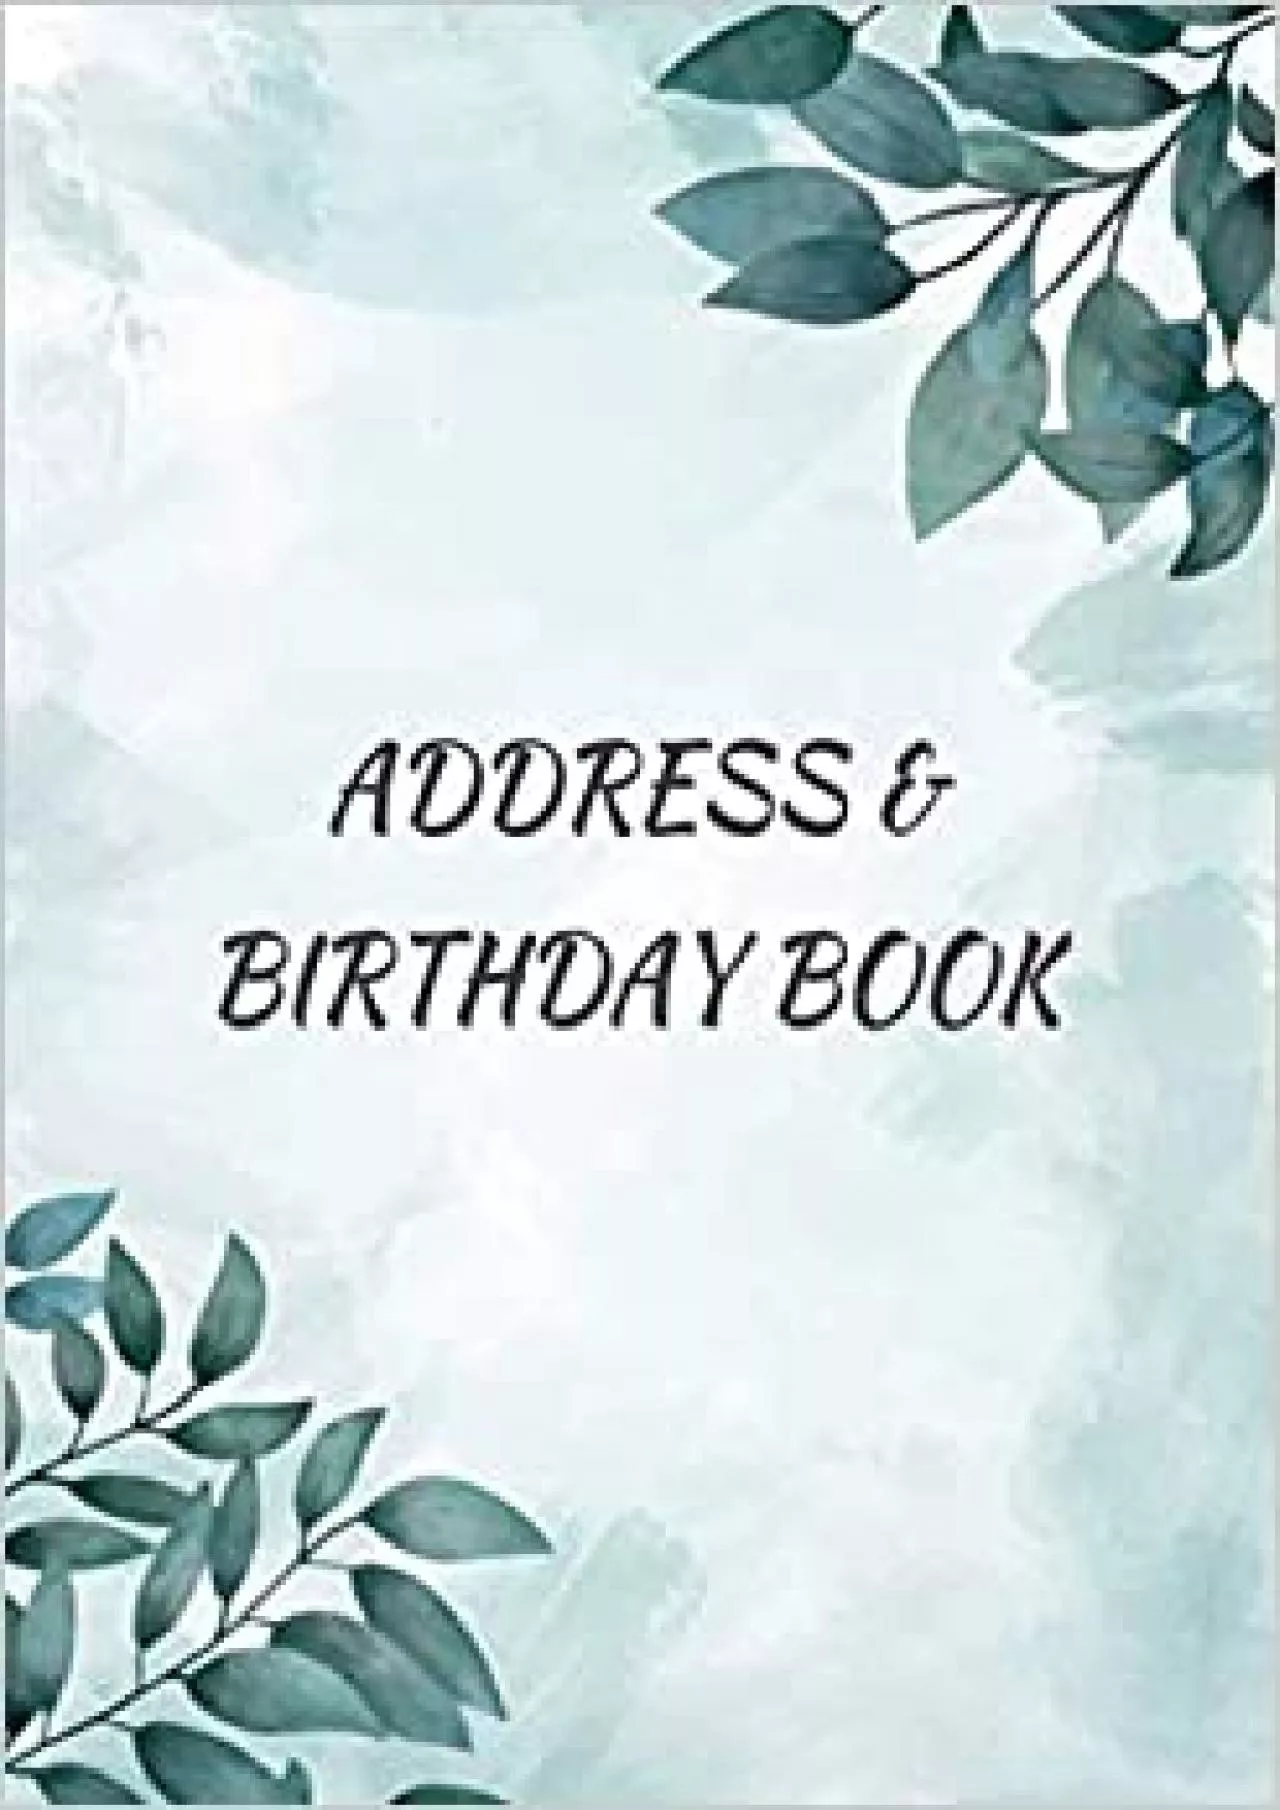 (EBOOK)-Address  Birthday Book: A4 Address Book Large Print with Tabs for Elderly, Watercolor